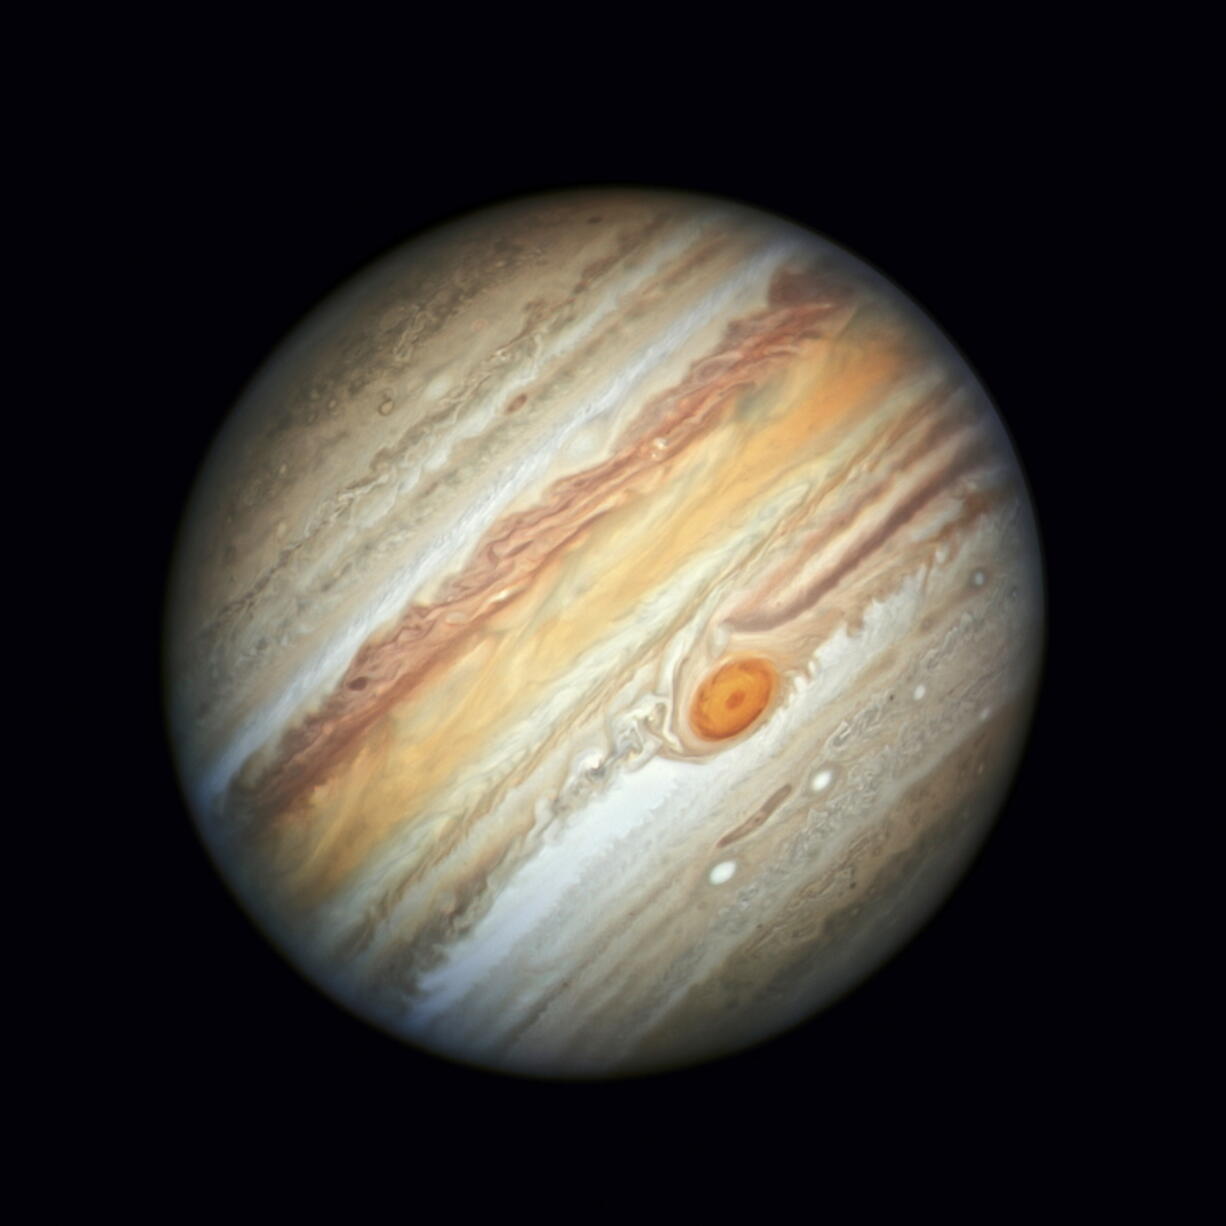 This photo made available by NASA shows the planet Jupiter, captured by the Hubble Space Telescope, on June 27, 2019. On Friday, Feb. 3, 2023, scientists said they have discovered 12 new moons around the gas giant, putting the total count at a record-breaking 92. That's more than any other planet in our solar system. (NASA, ESA, A. Simon/Goddard Space Flight Center, M.H.